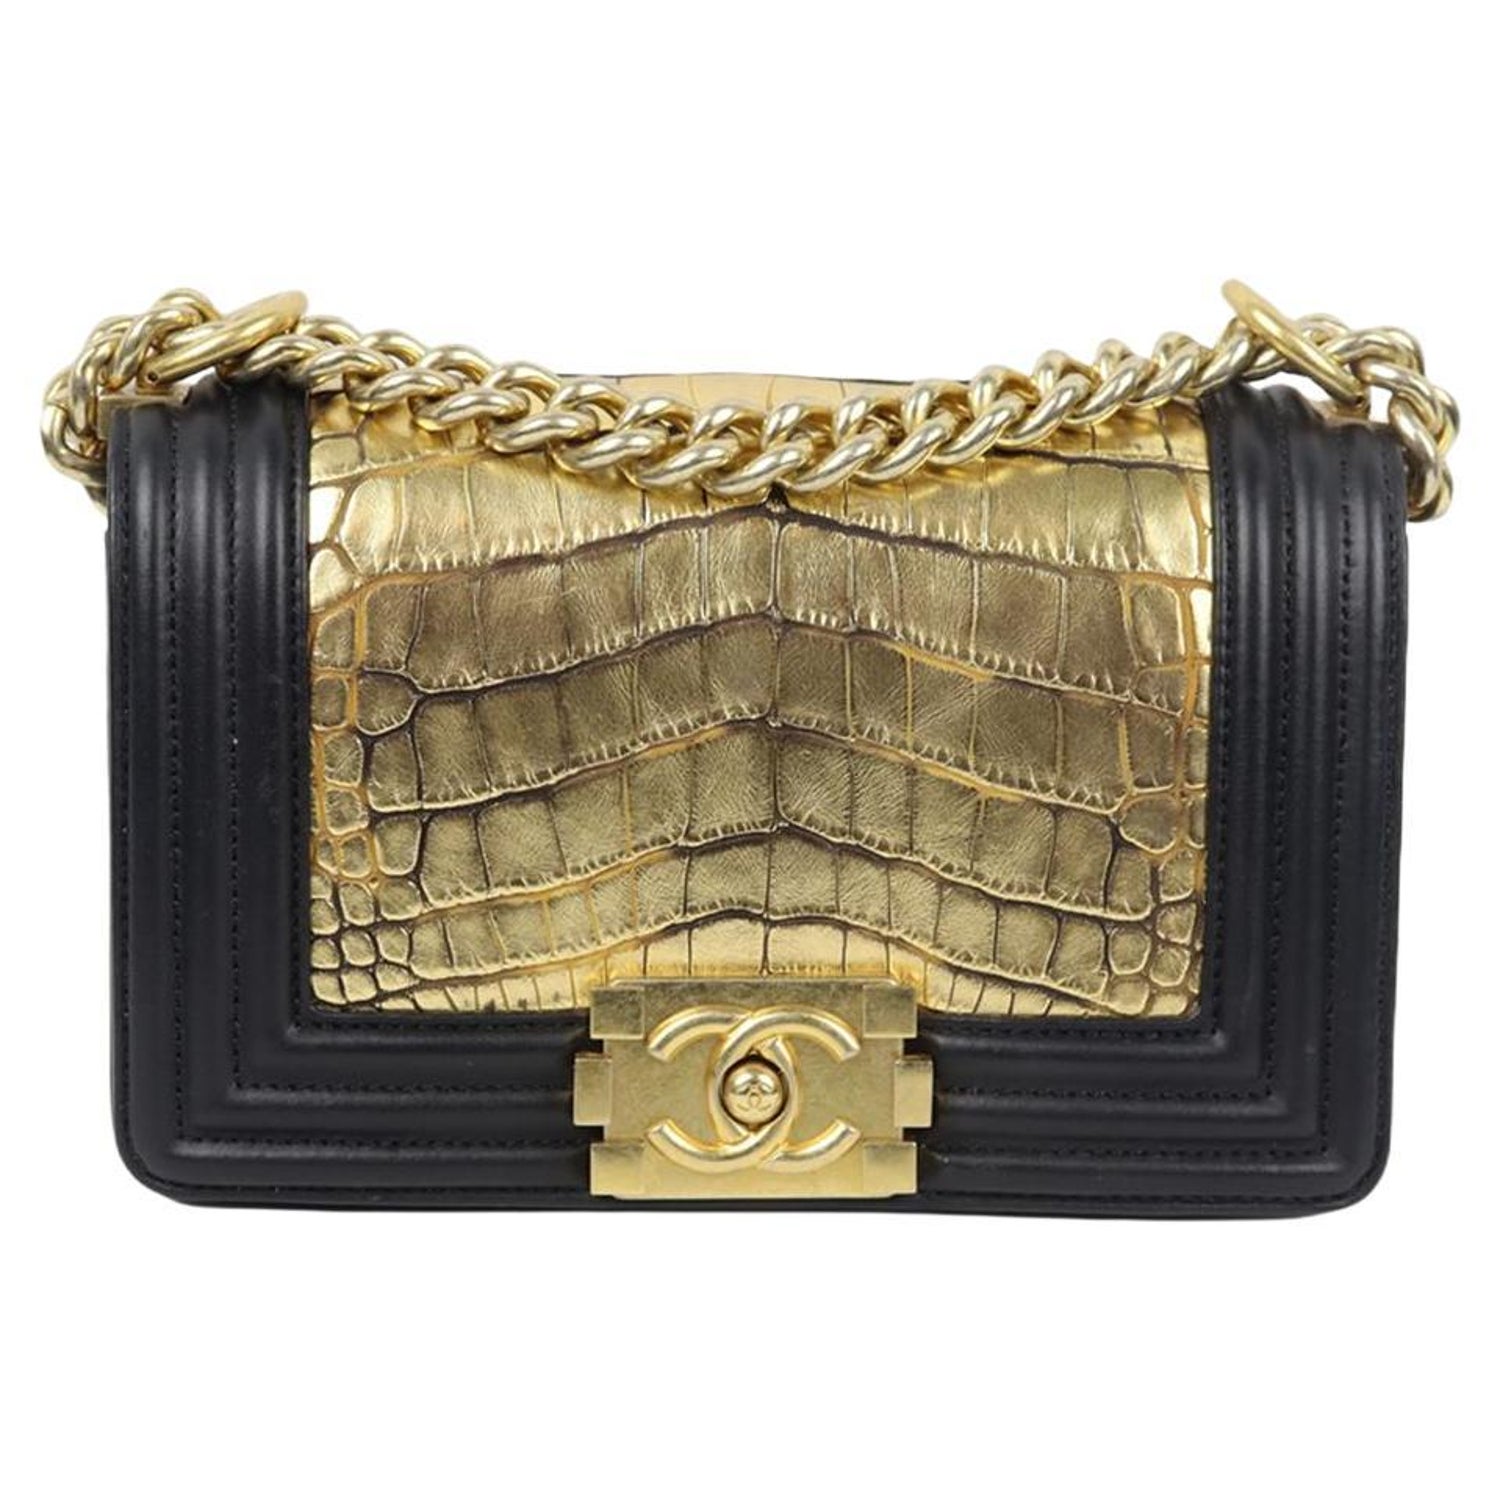 Vintage Chanel Suede Bags - 37 For Sale on 1stDibs